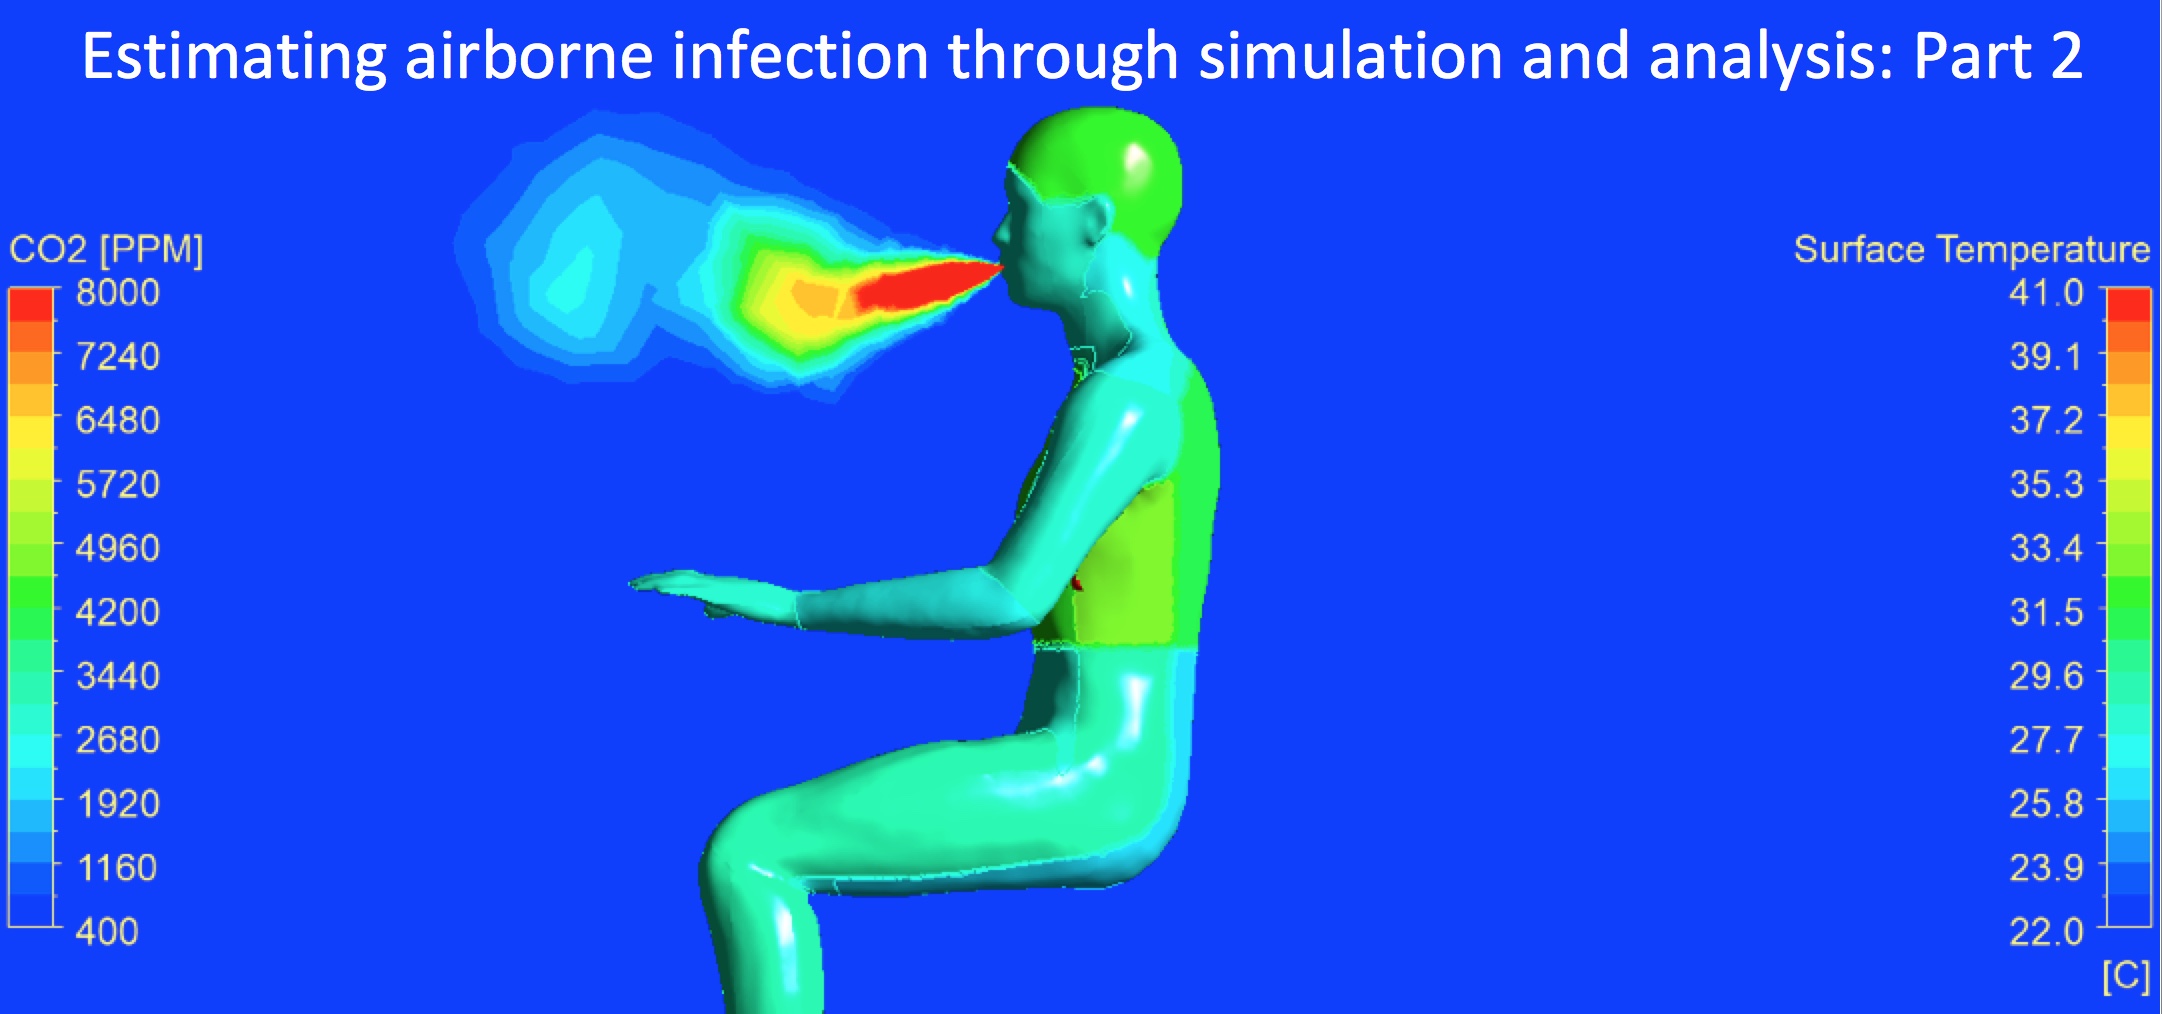 Estimating airborne infection through simulation & analysis – Part 2: 24th February 2022